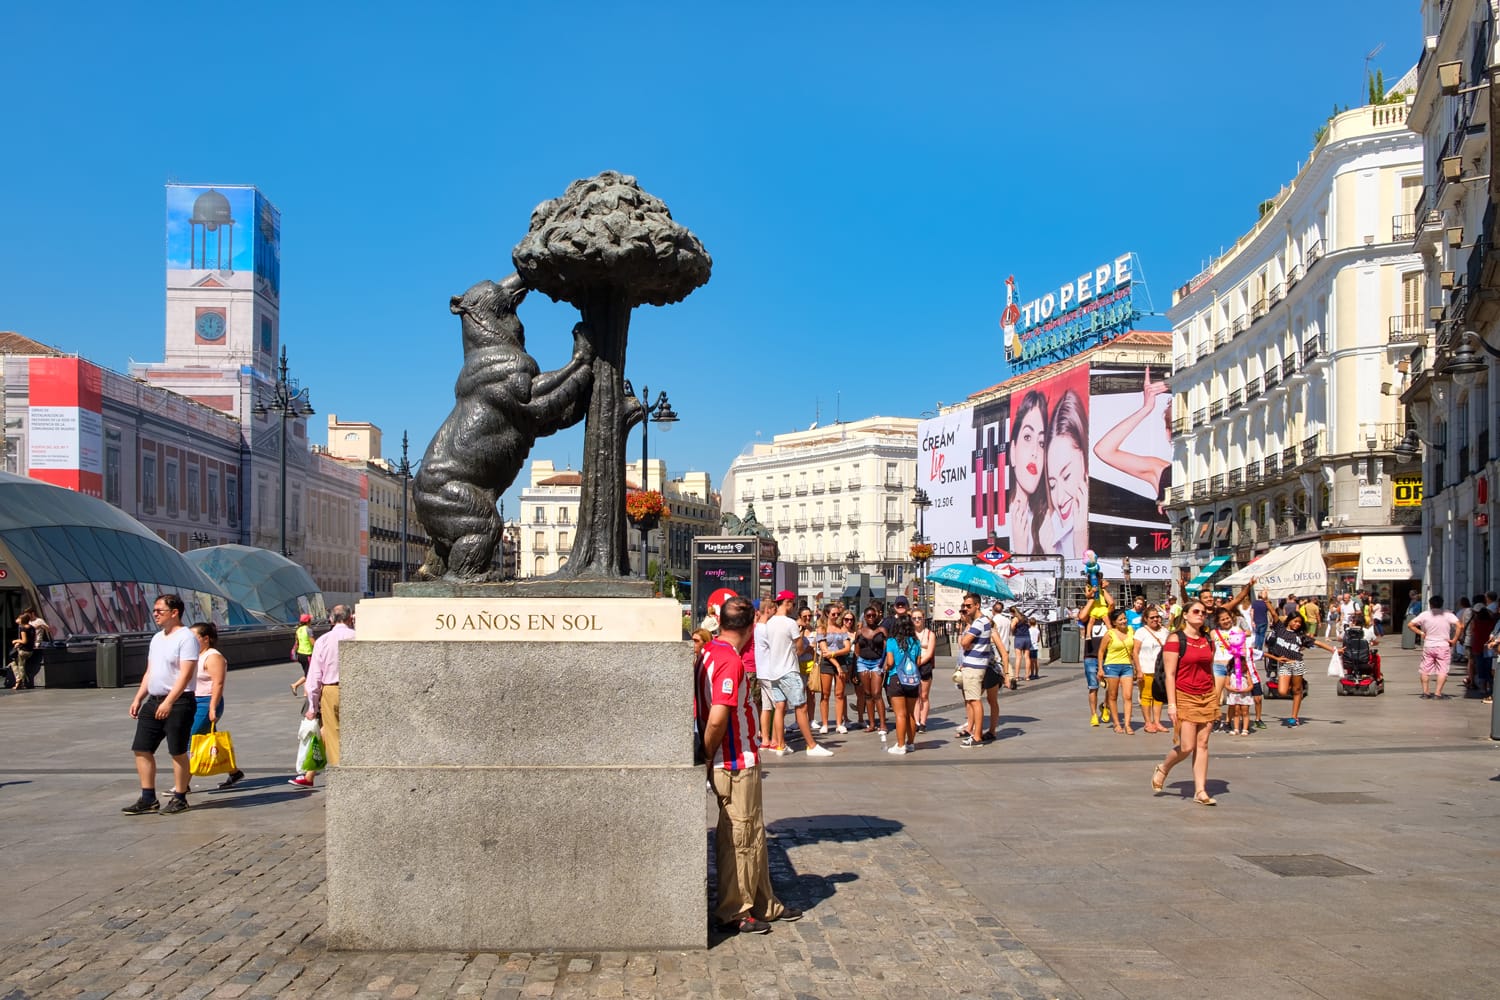 Puerta del Sol, one of the busiest places in Madrid with the statue of a bear and a madrone tree, the symbol of the city